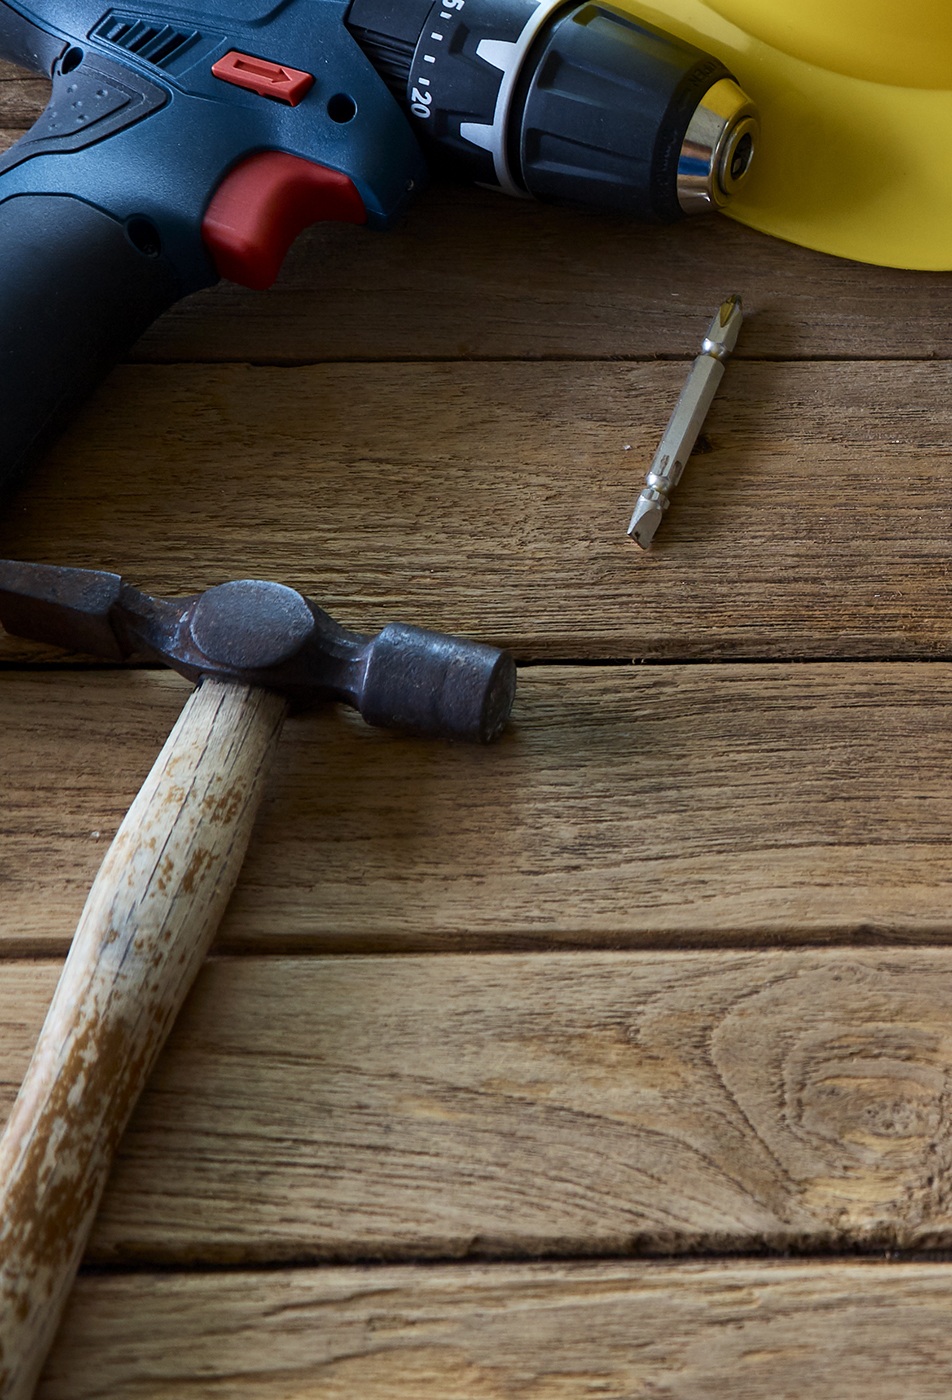 Tools and helmet on the wooden floor. Image with copy space. Labor day concept